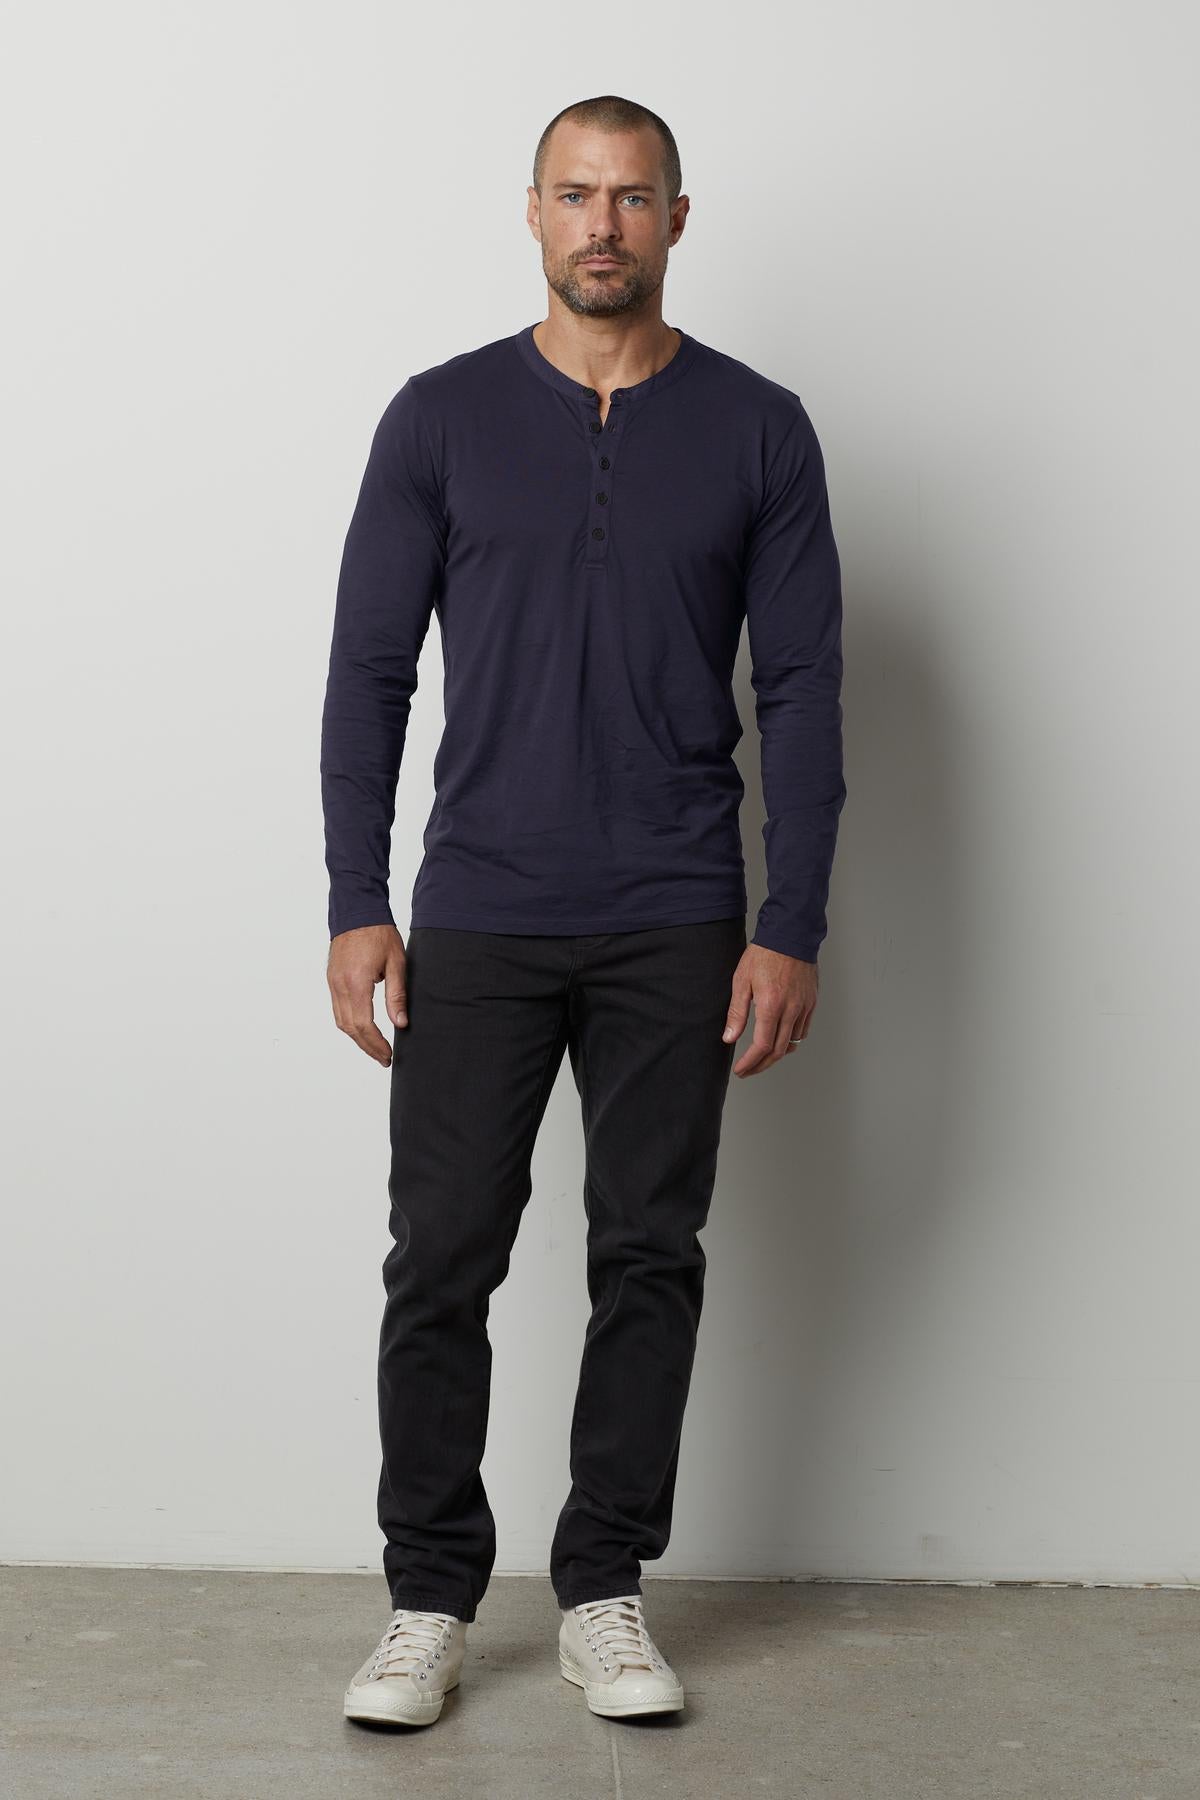 A man wearing a soft navy ALVARO COTTON JERSEY HENLEY t-shirt and lightweight black pants by Velvet by Graham & Spencer.-35607611113665